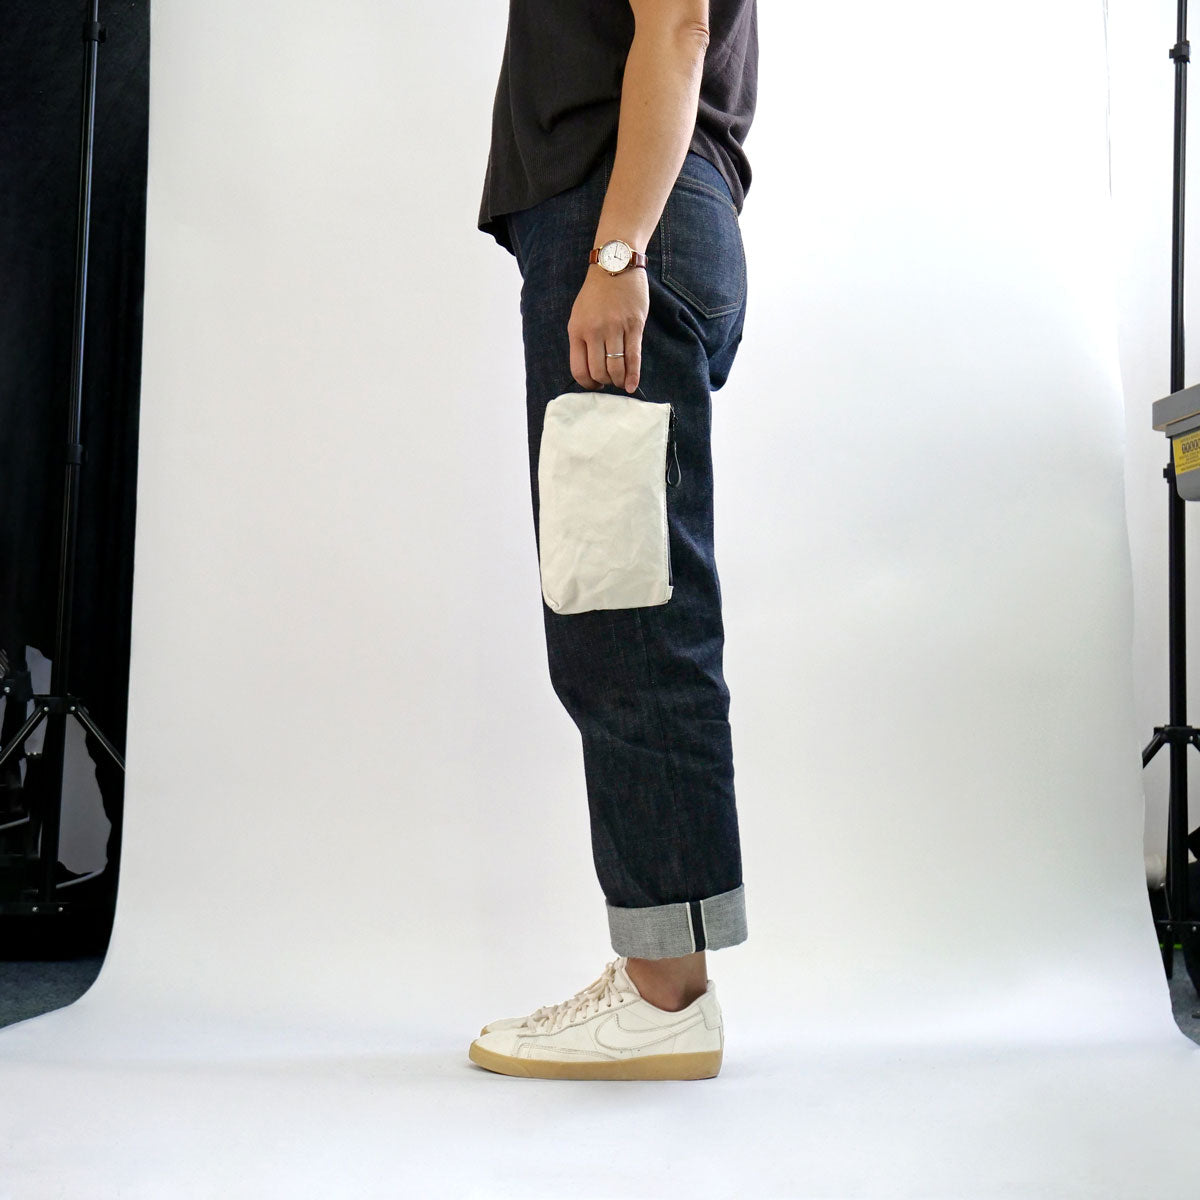 Reggie the pouch by Baxley shown in chalk white. It is being held by a side handle by a female model in a studio setting. The model is wearing jeans a t-shirt and trainers.